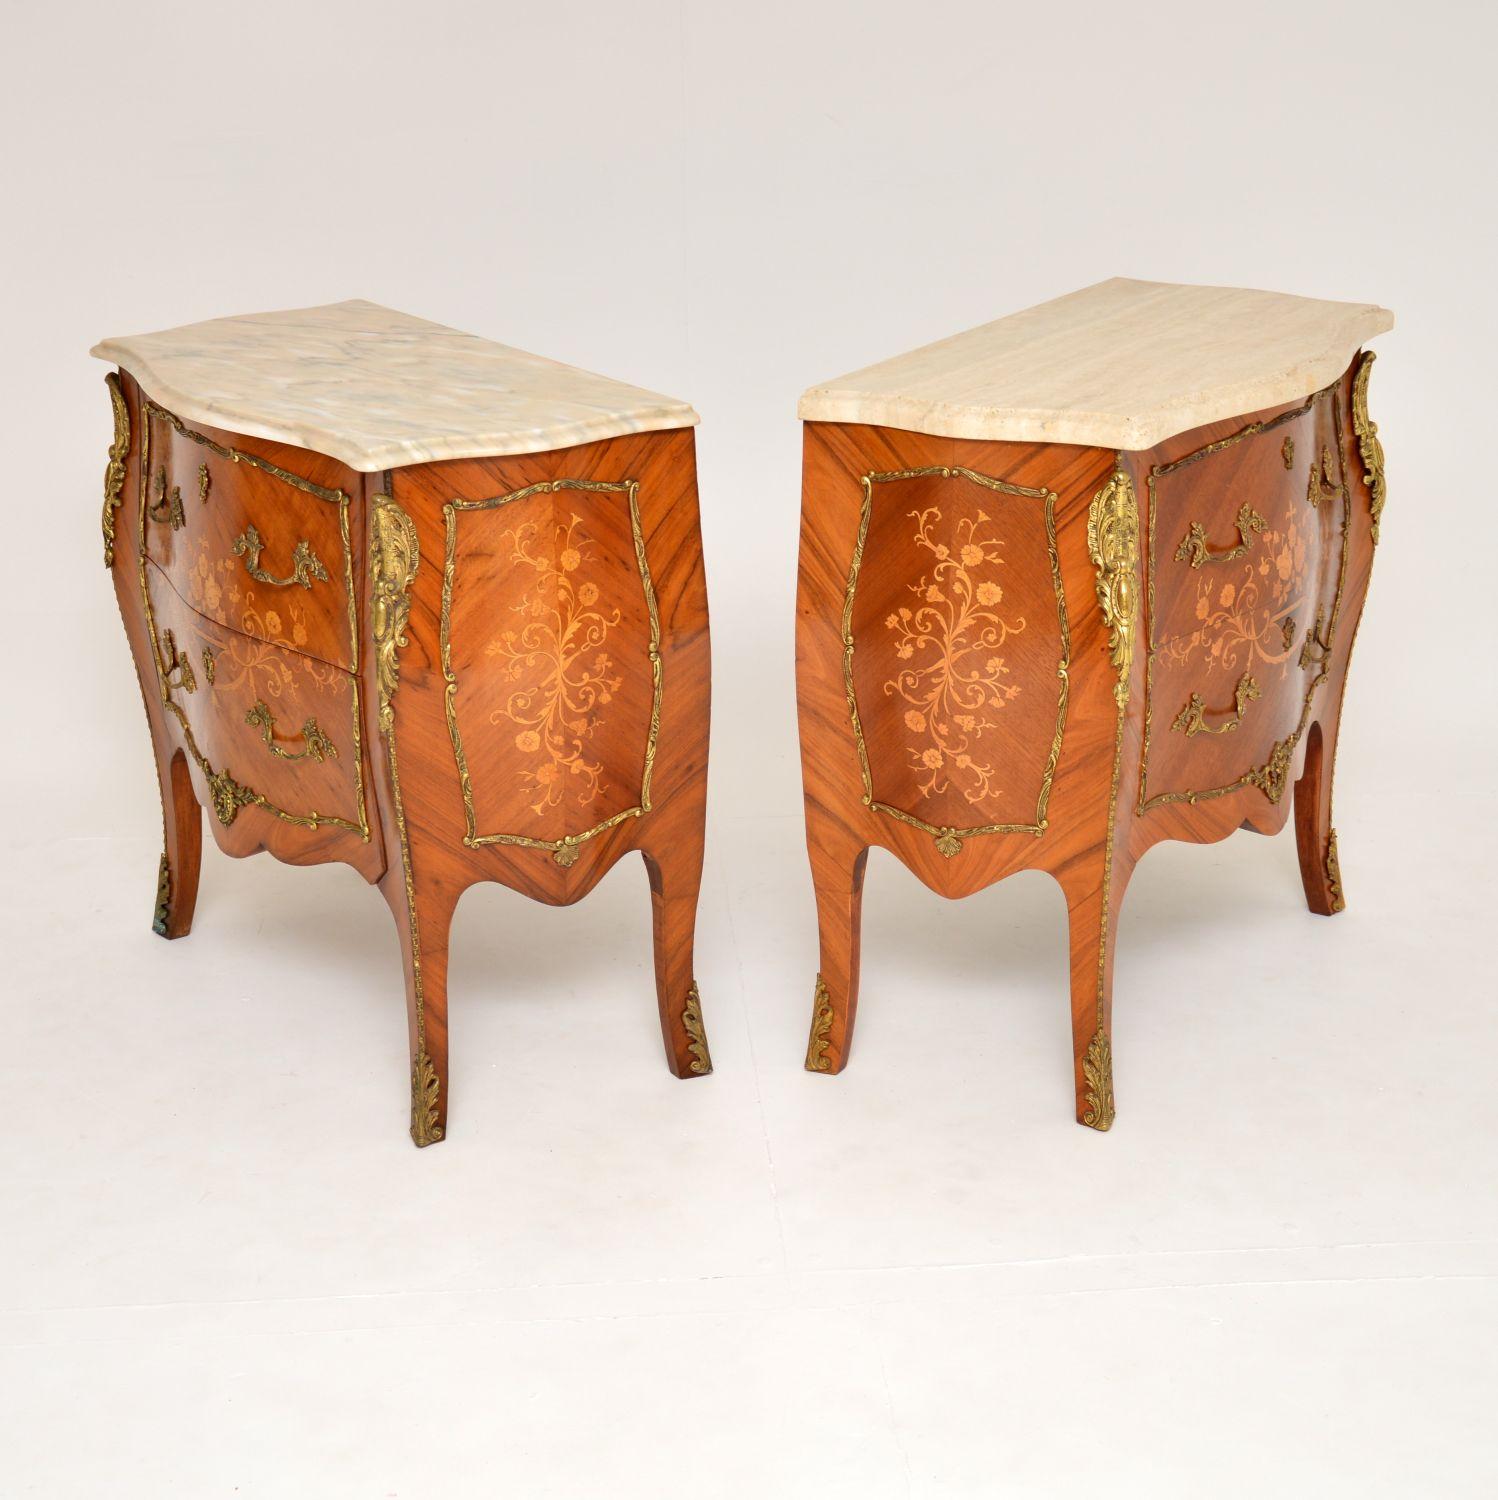 Mid-20th Century Pair of Antique French Marble Top Inlaid Marquetry Commodes